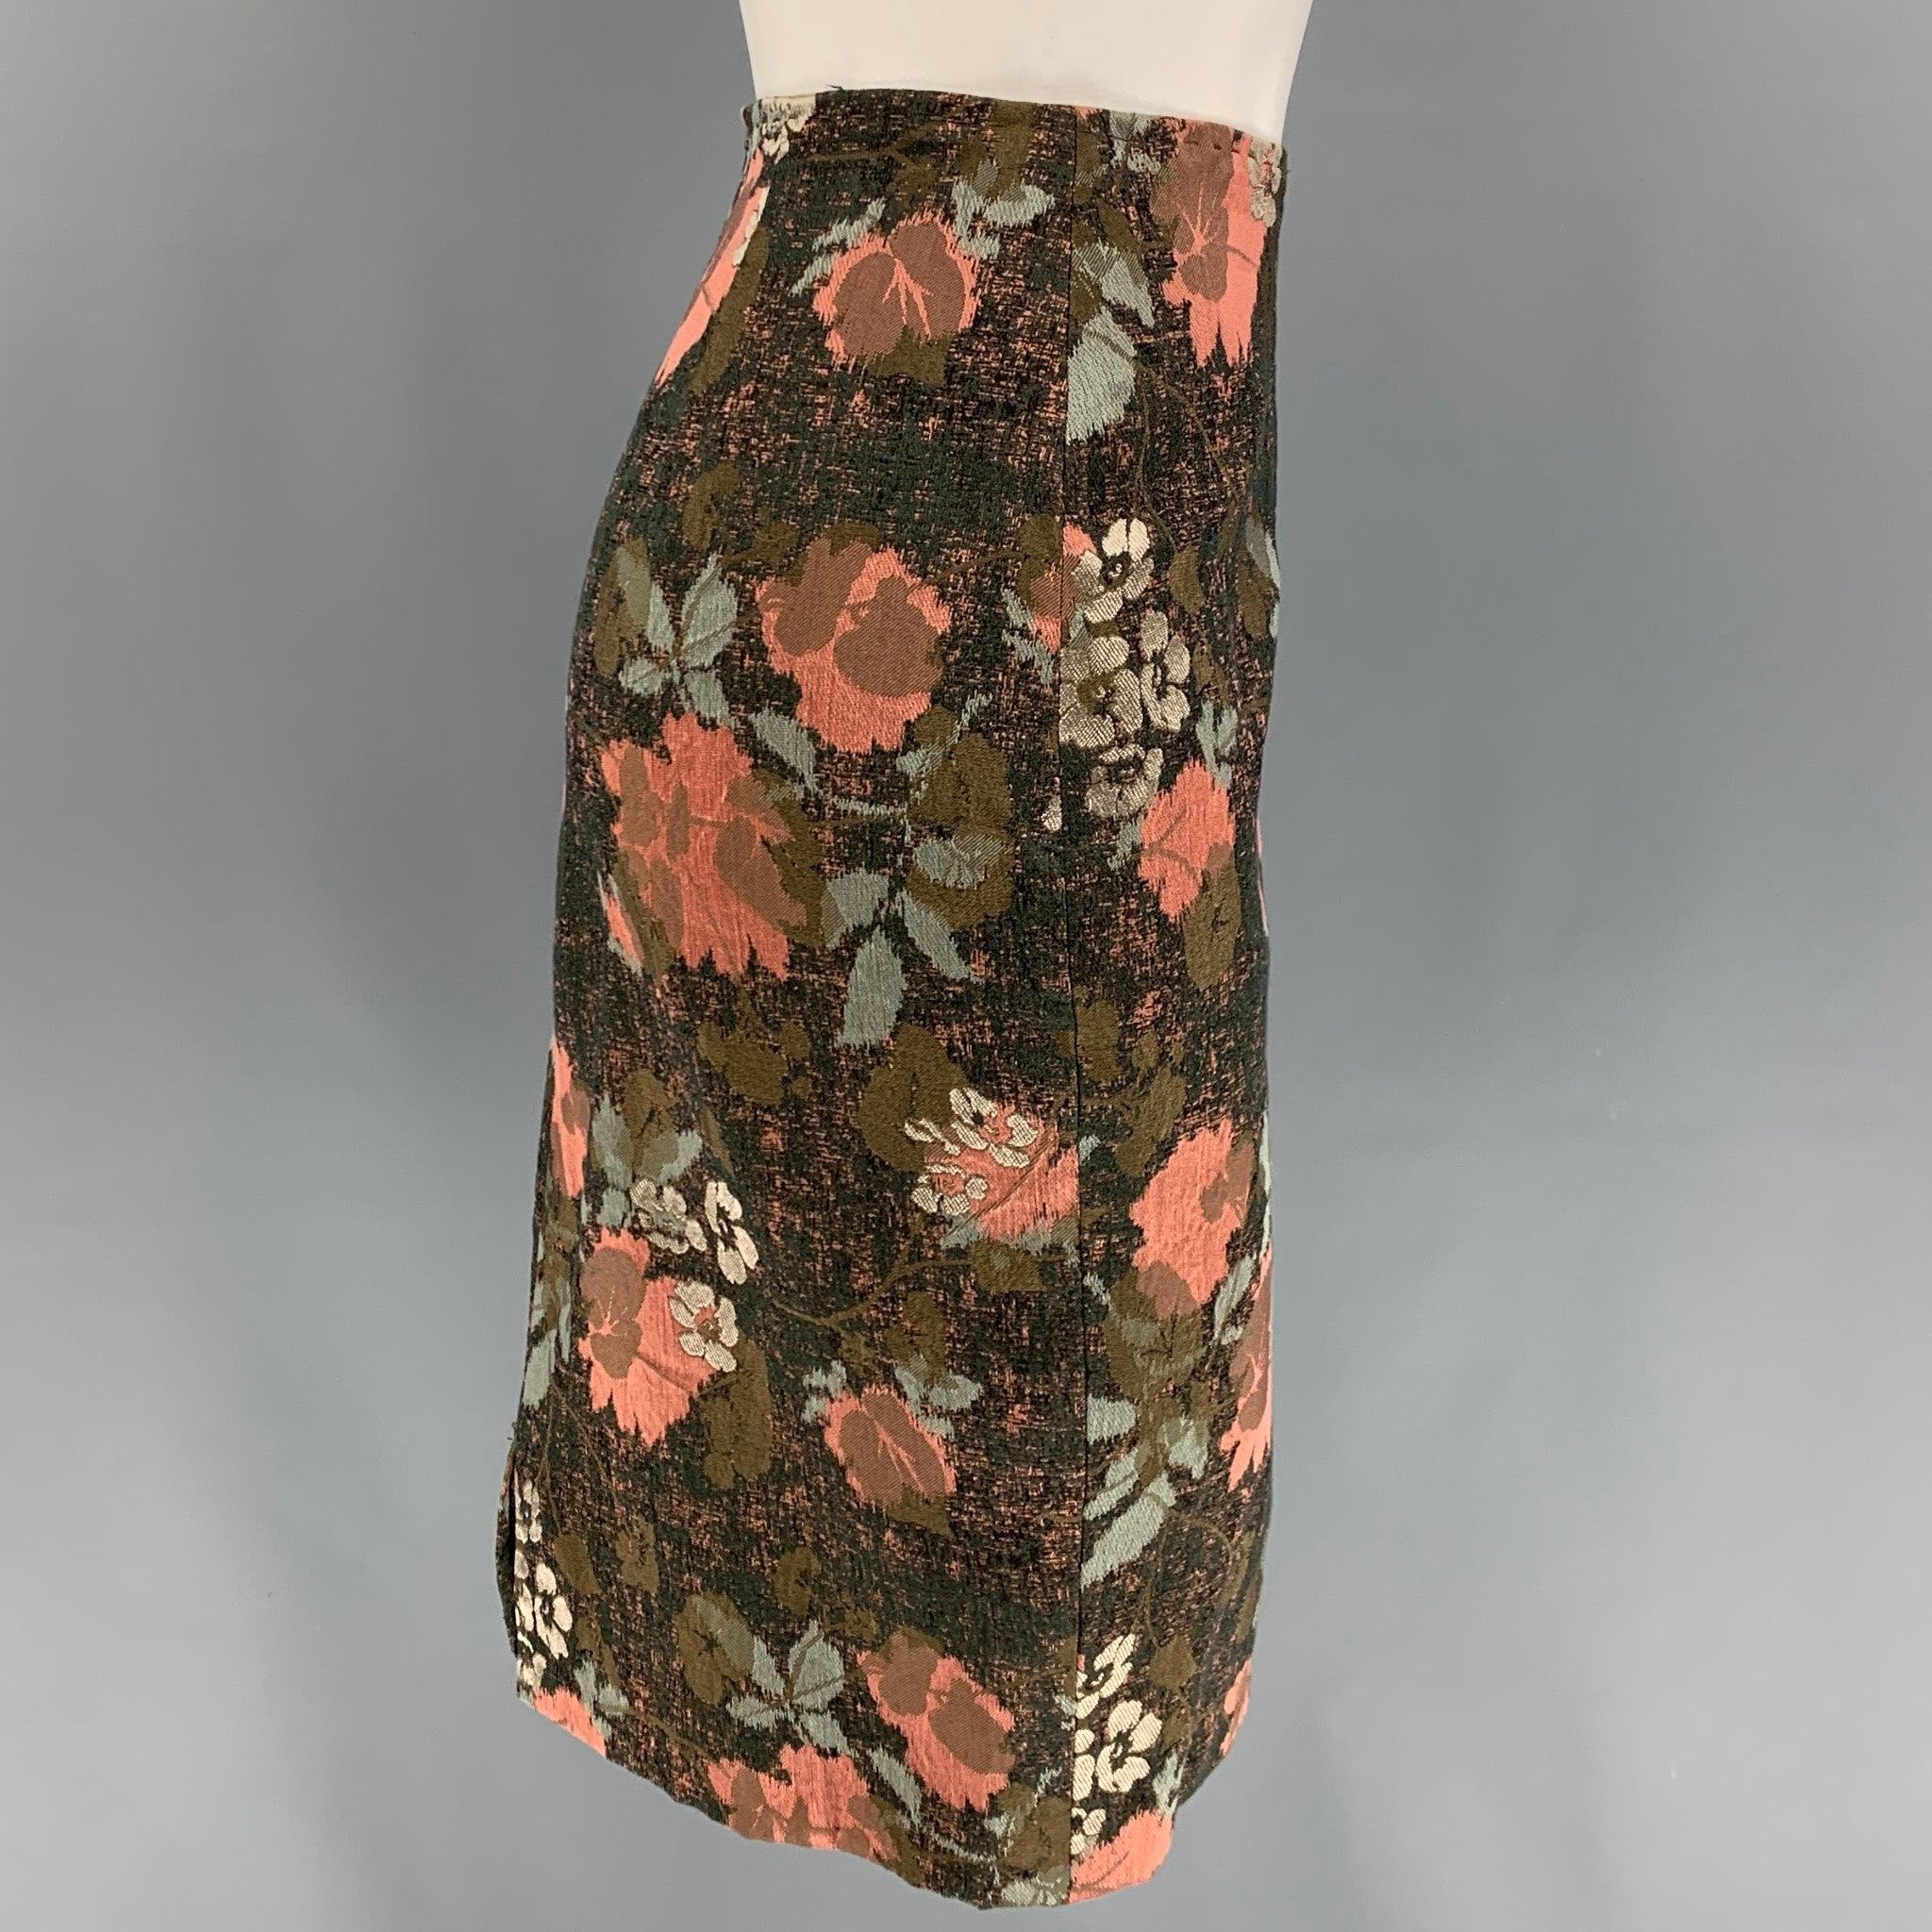 DRIES VAN NOTEN skirt comes in multi-color woven floral cotton blend with a slip liner featuring a pencil style and a back zip up closure.
Very Good
Pre-Owned Condition. 

Marked:   38 

Measurements: 
  Waist: 28 inches  Hip: 35 inches  Length: